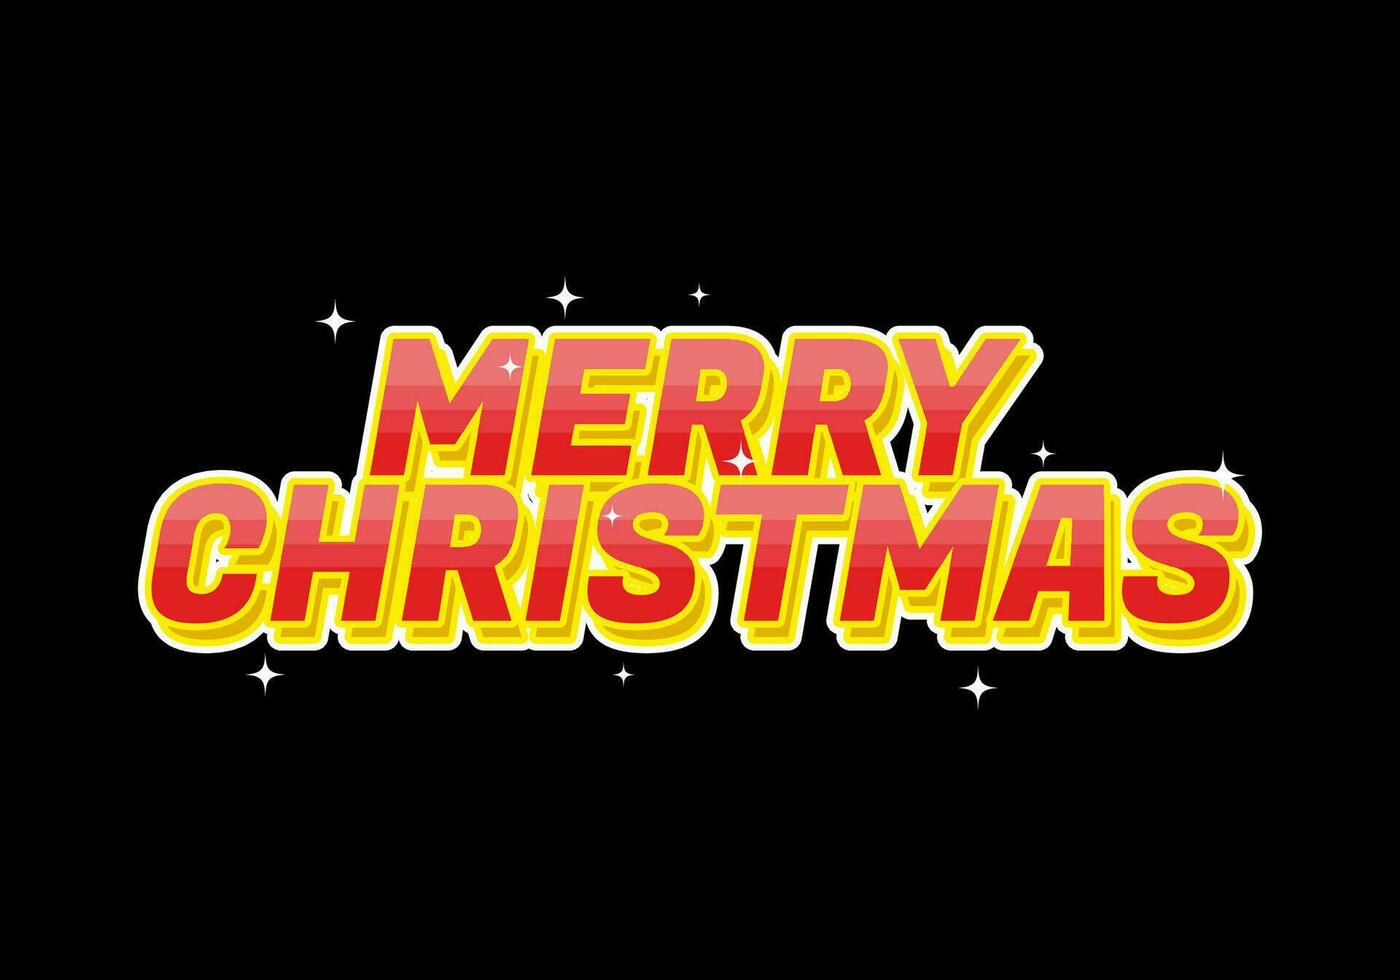 Merry Christmas text effect in red yellow color. black background vector